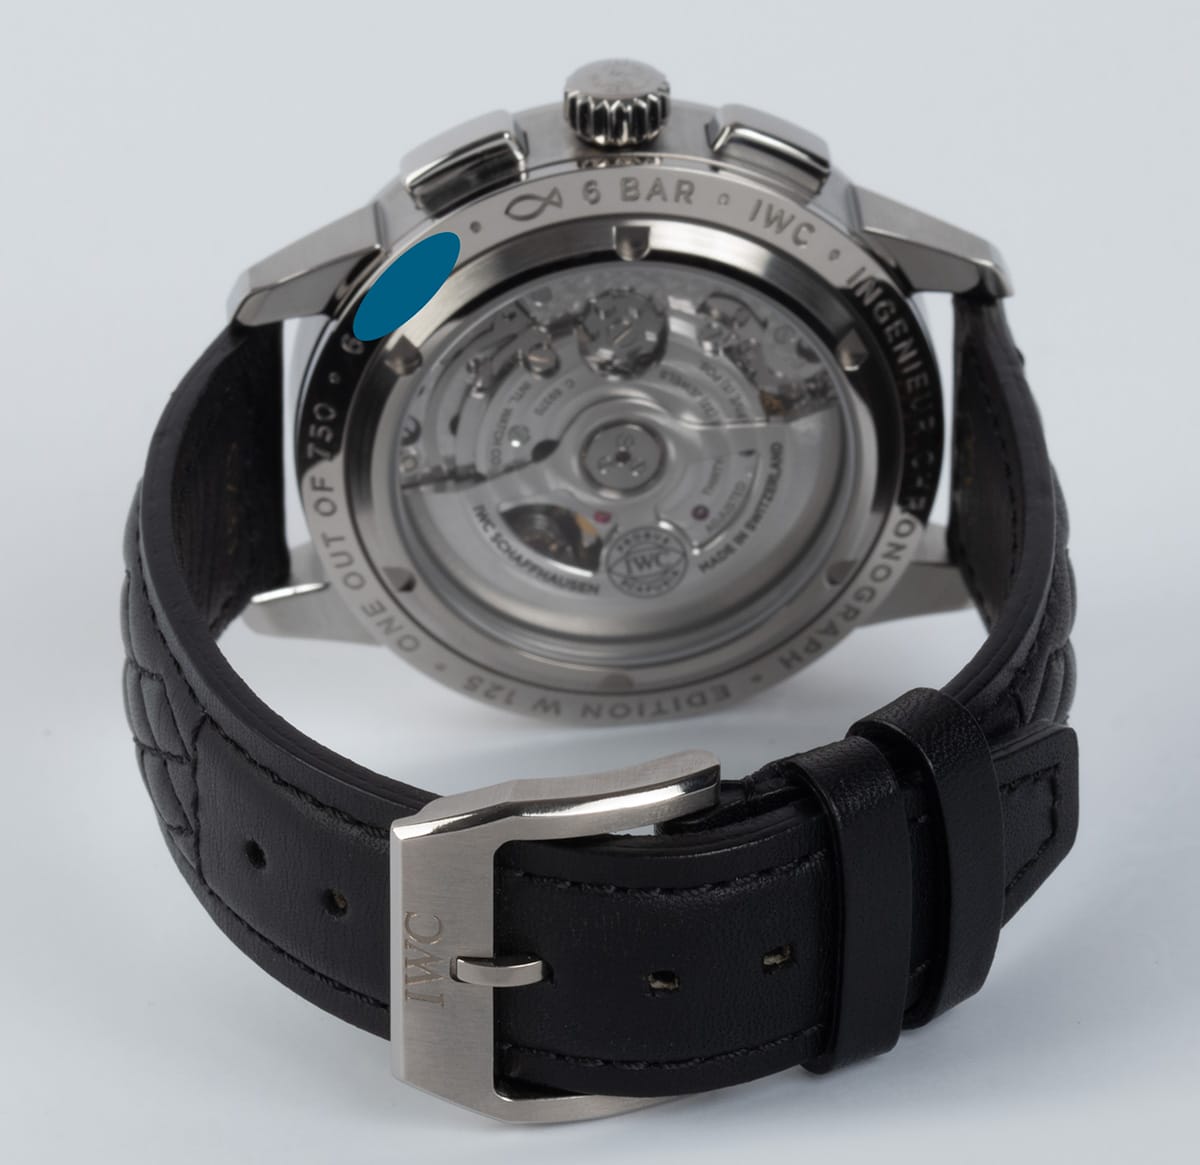 Rear / Band View of Ingenieur 'W 125' Chronograph LE